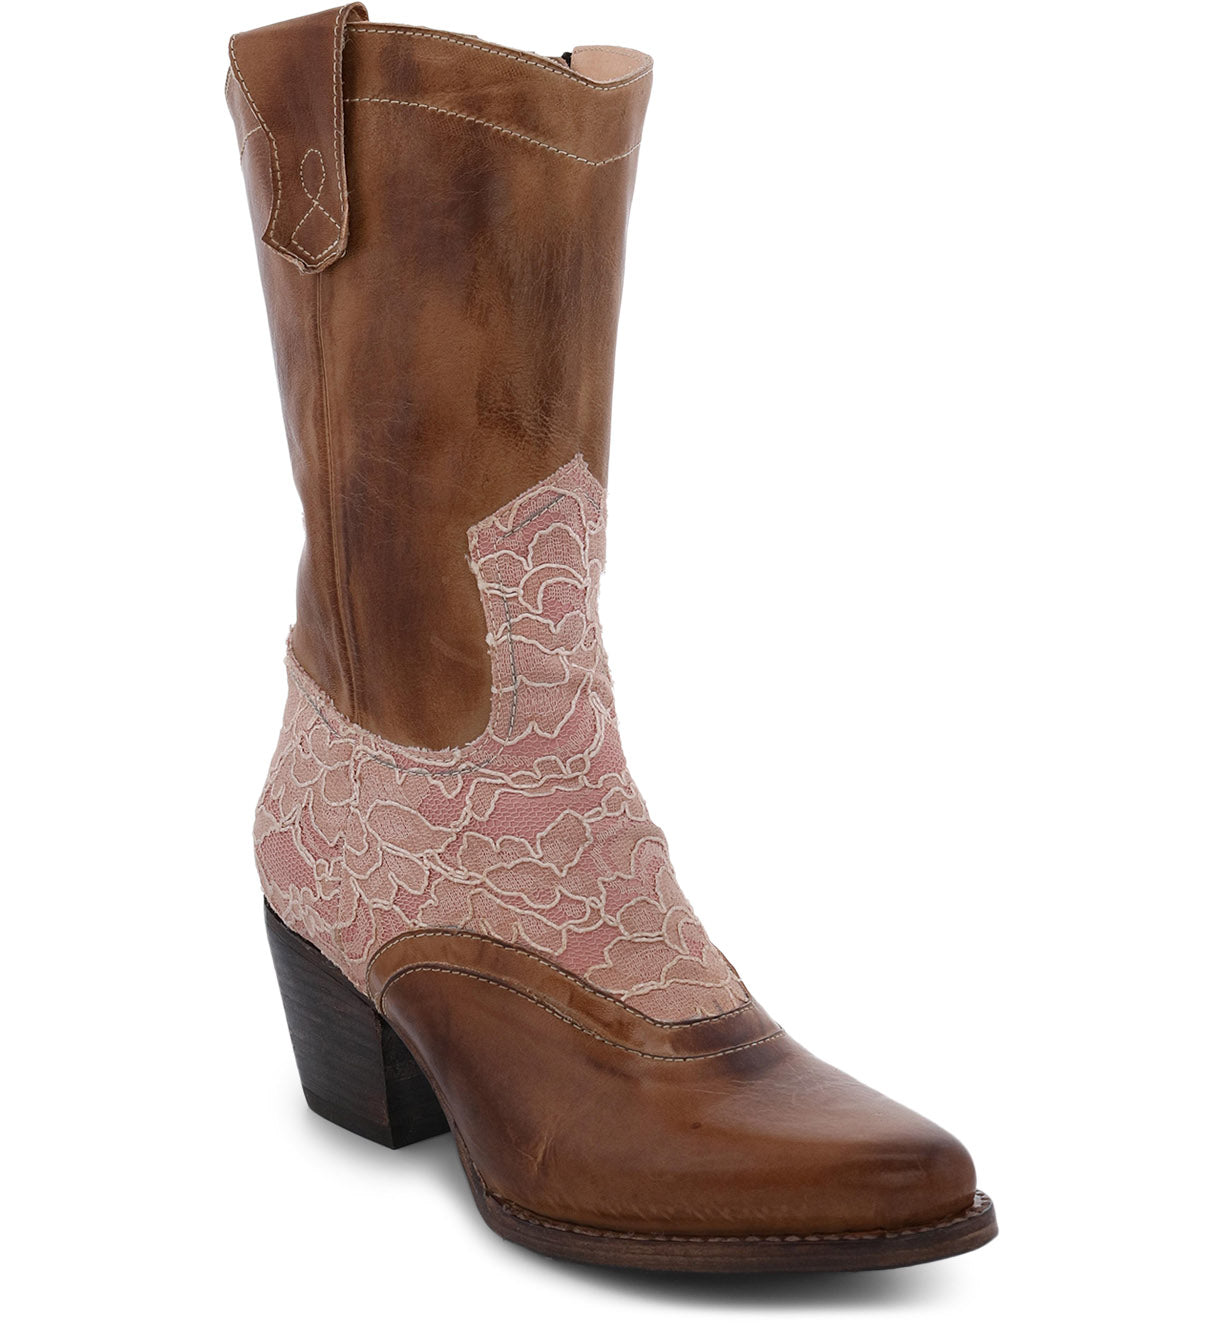 A Basanti women's hand tooled leather boot in brown with pink lace from Oak Tree Farms.